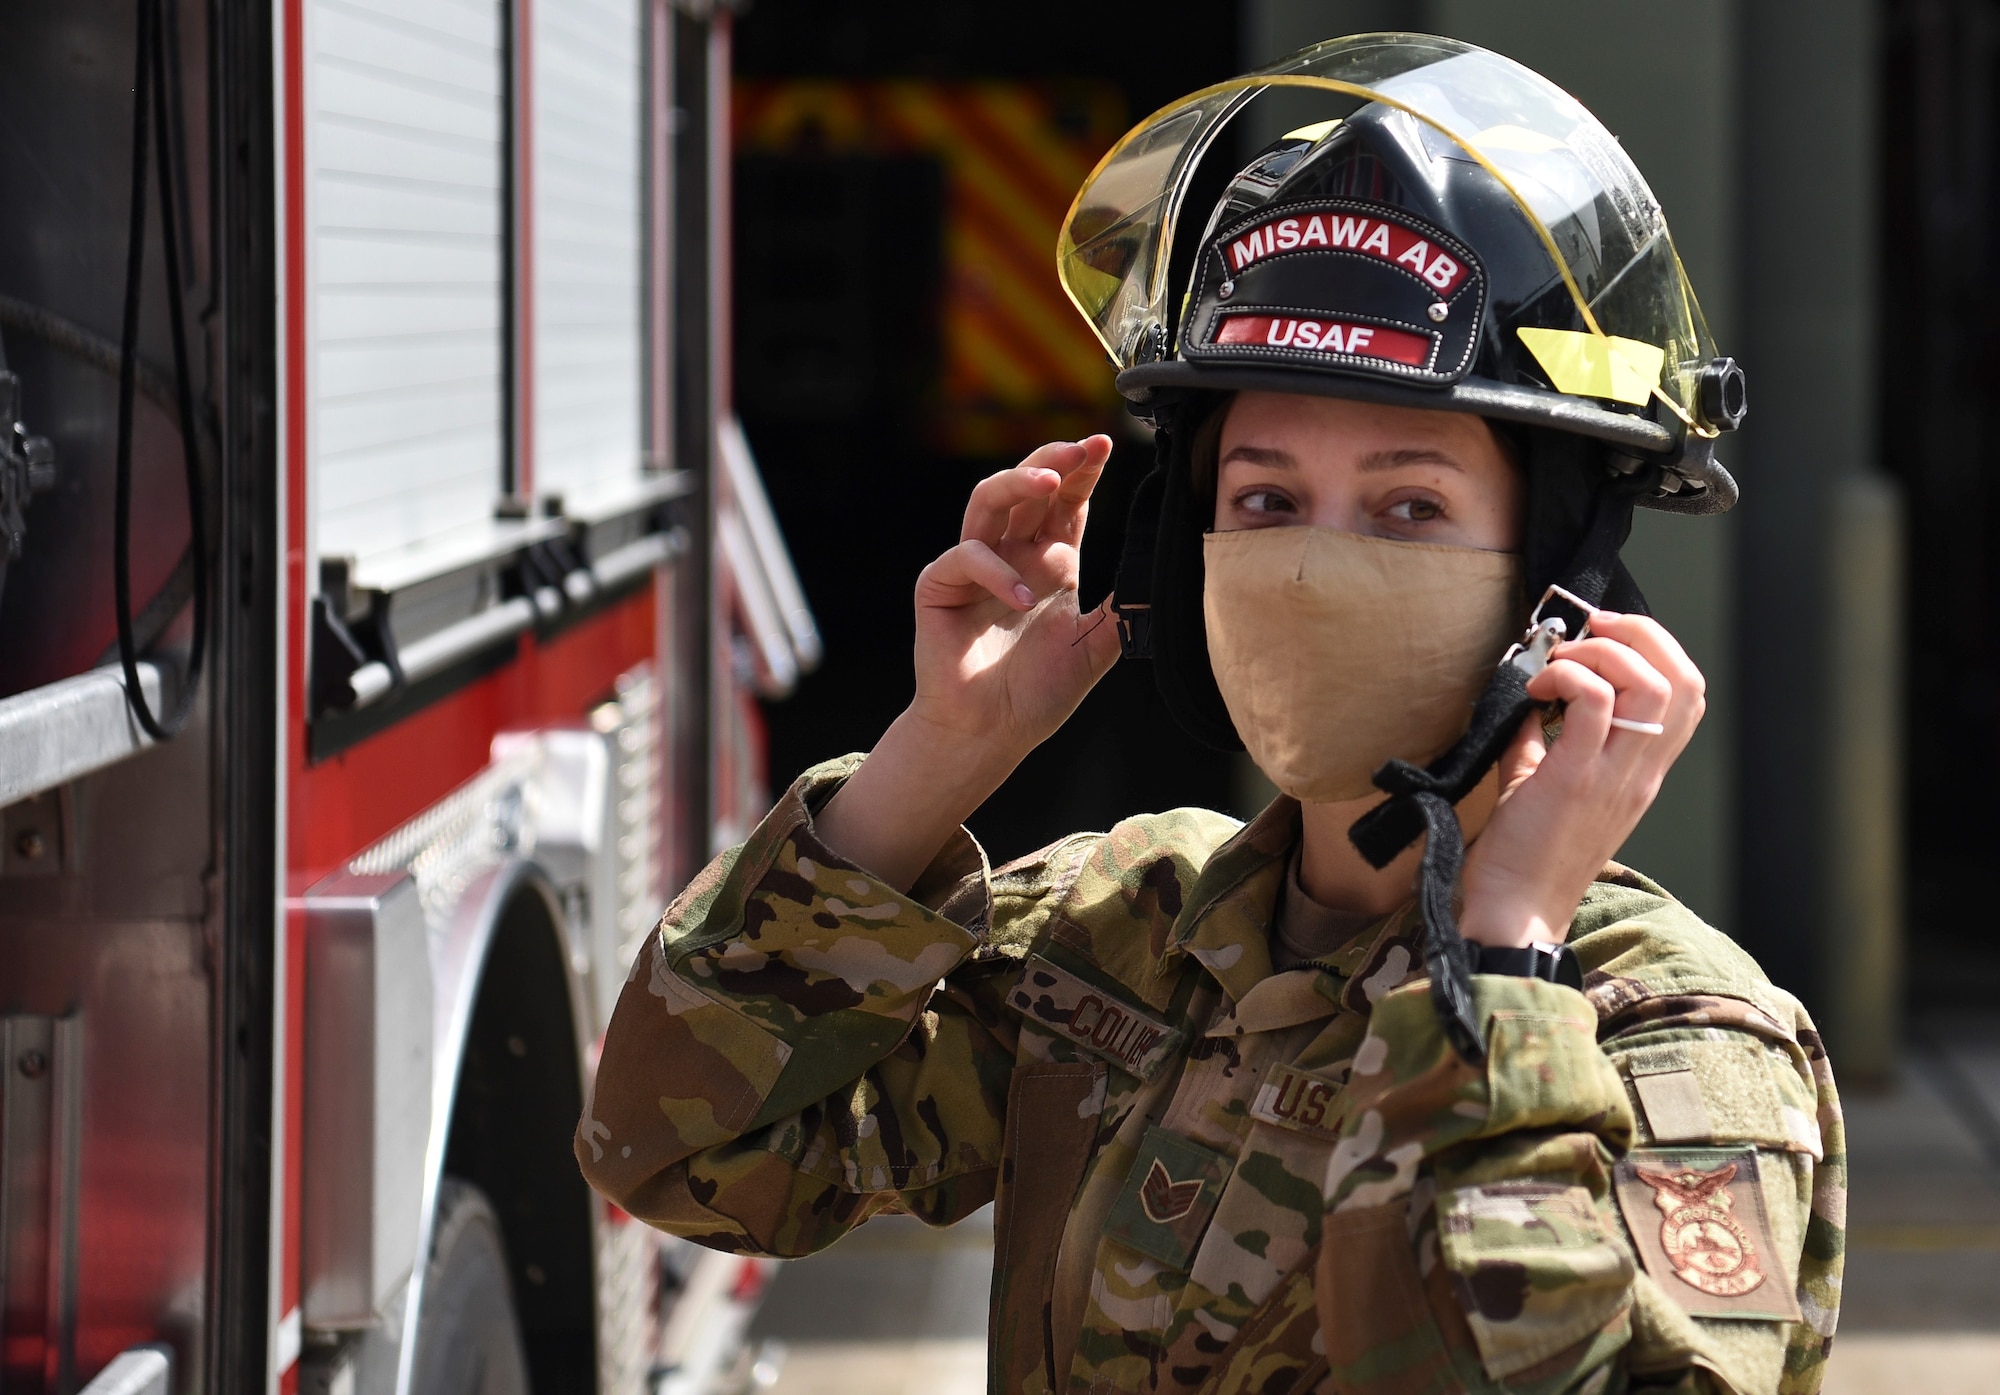 U.S. Air Force Staff Sgt. Journey Collier, a 35th Civil Engineer Squadron firefighter, puts on her helmet at Misawa Air Base, Japan, March 31, 2021.  Collier recently won the Air Force Military Firefighter of the Year award. She also streamlined the certification process for new firefighters at Misawa. (U.S. Air Force photo by Airman 1st Class Joao Marcus Costa)